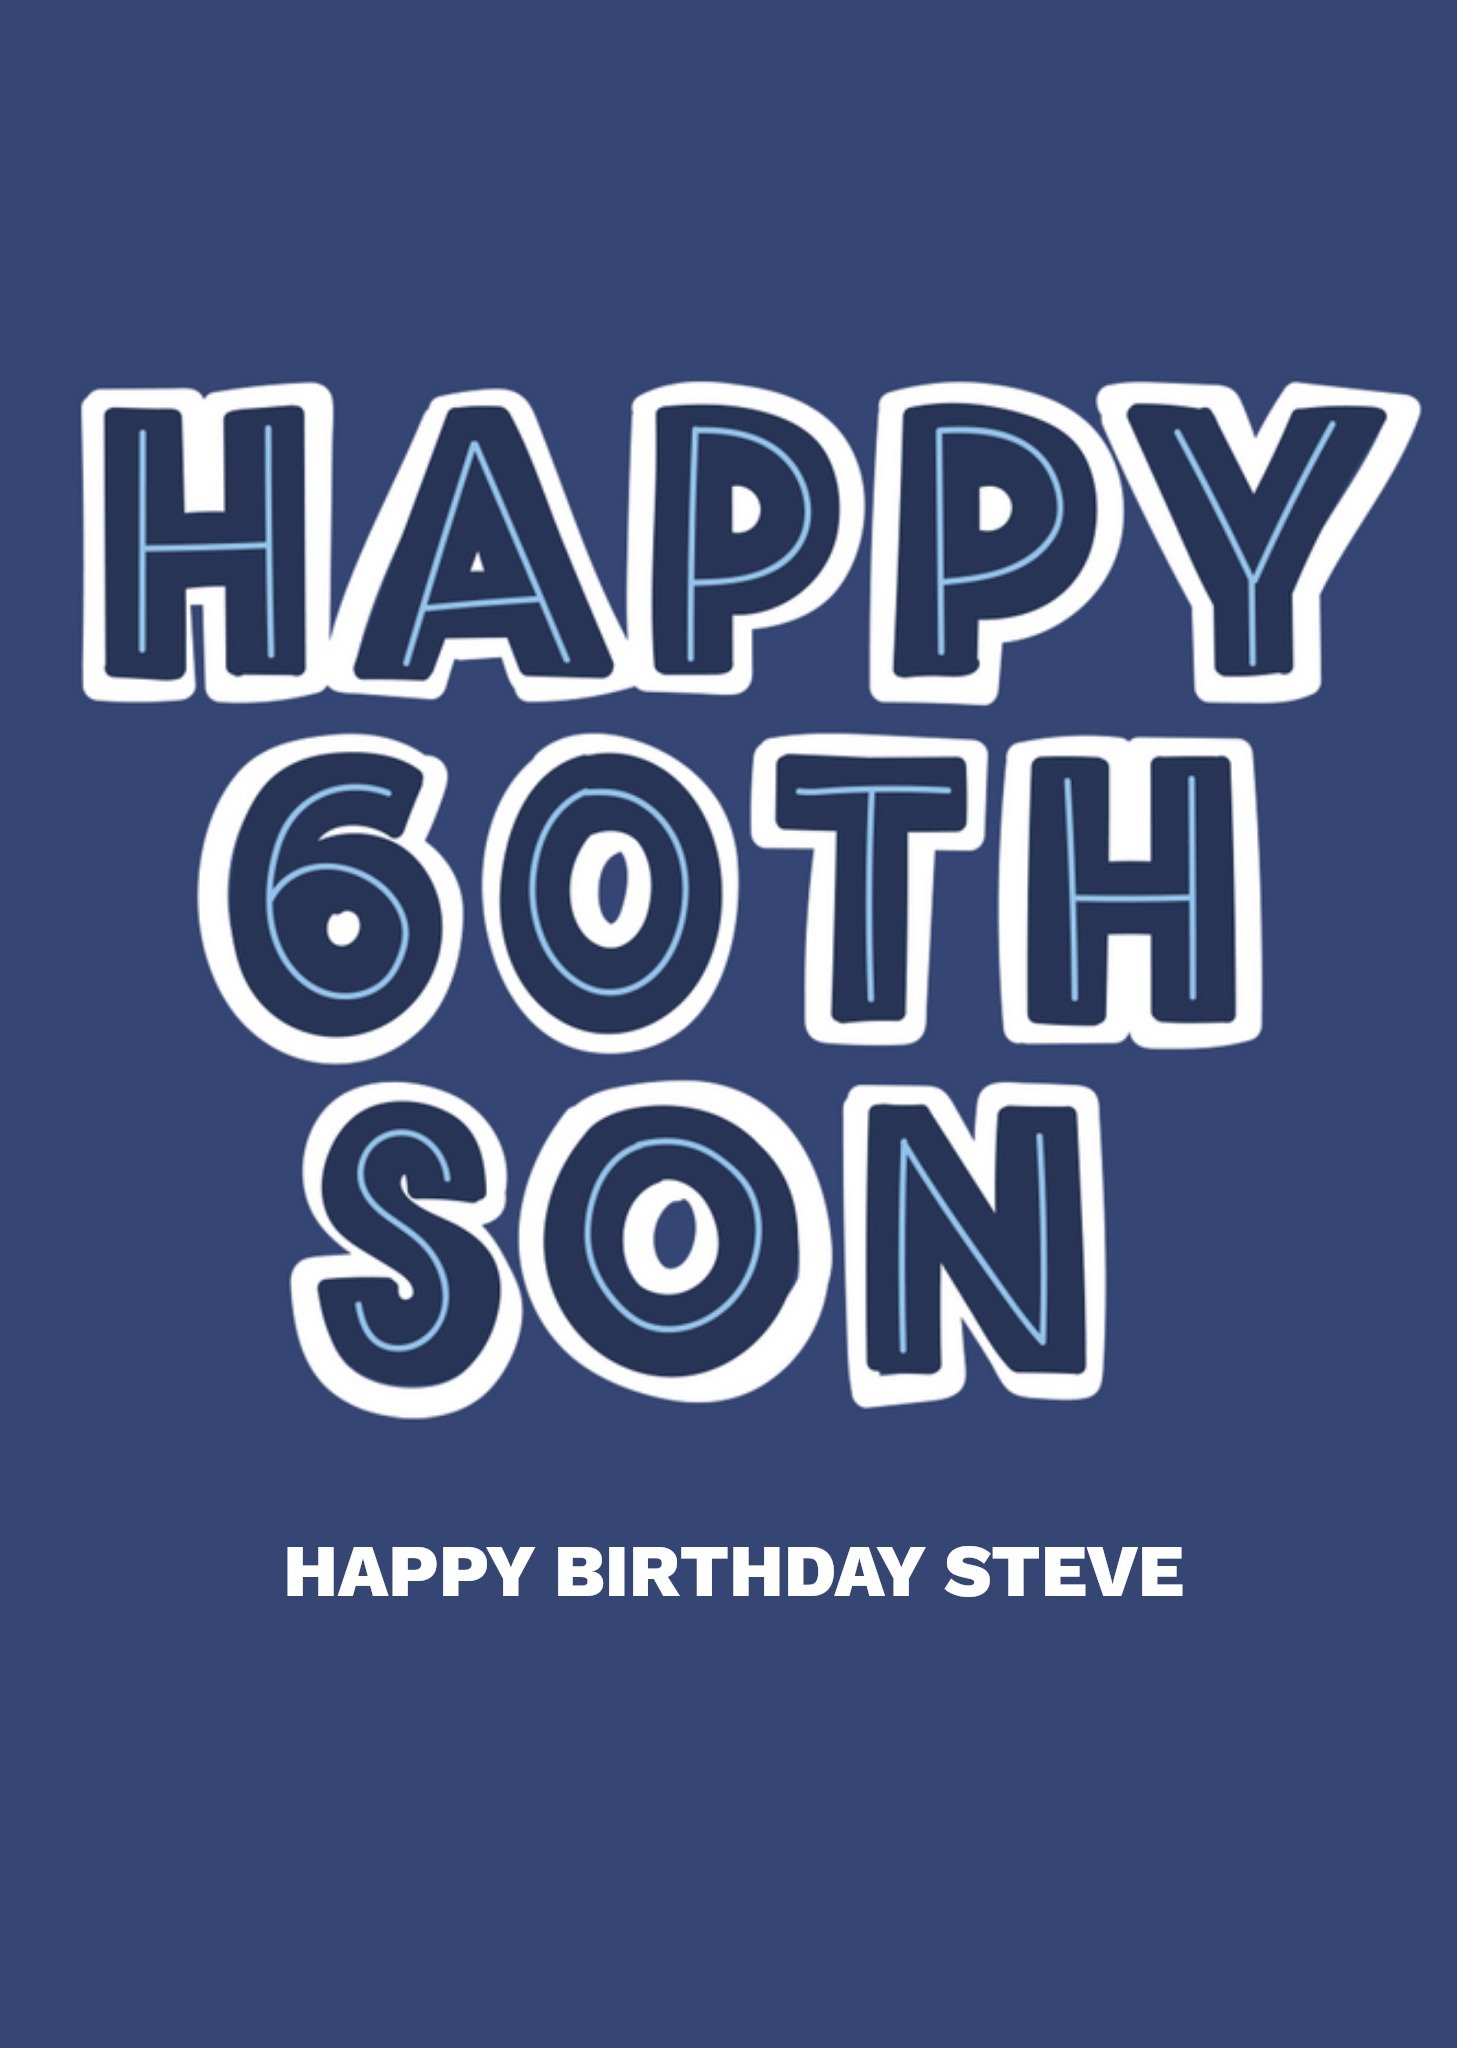 Moonpig Typographic Outline Lettering Happy 60th Son Birthday Card Ecard